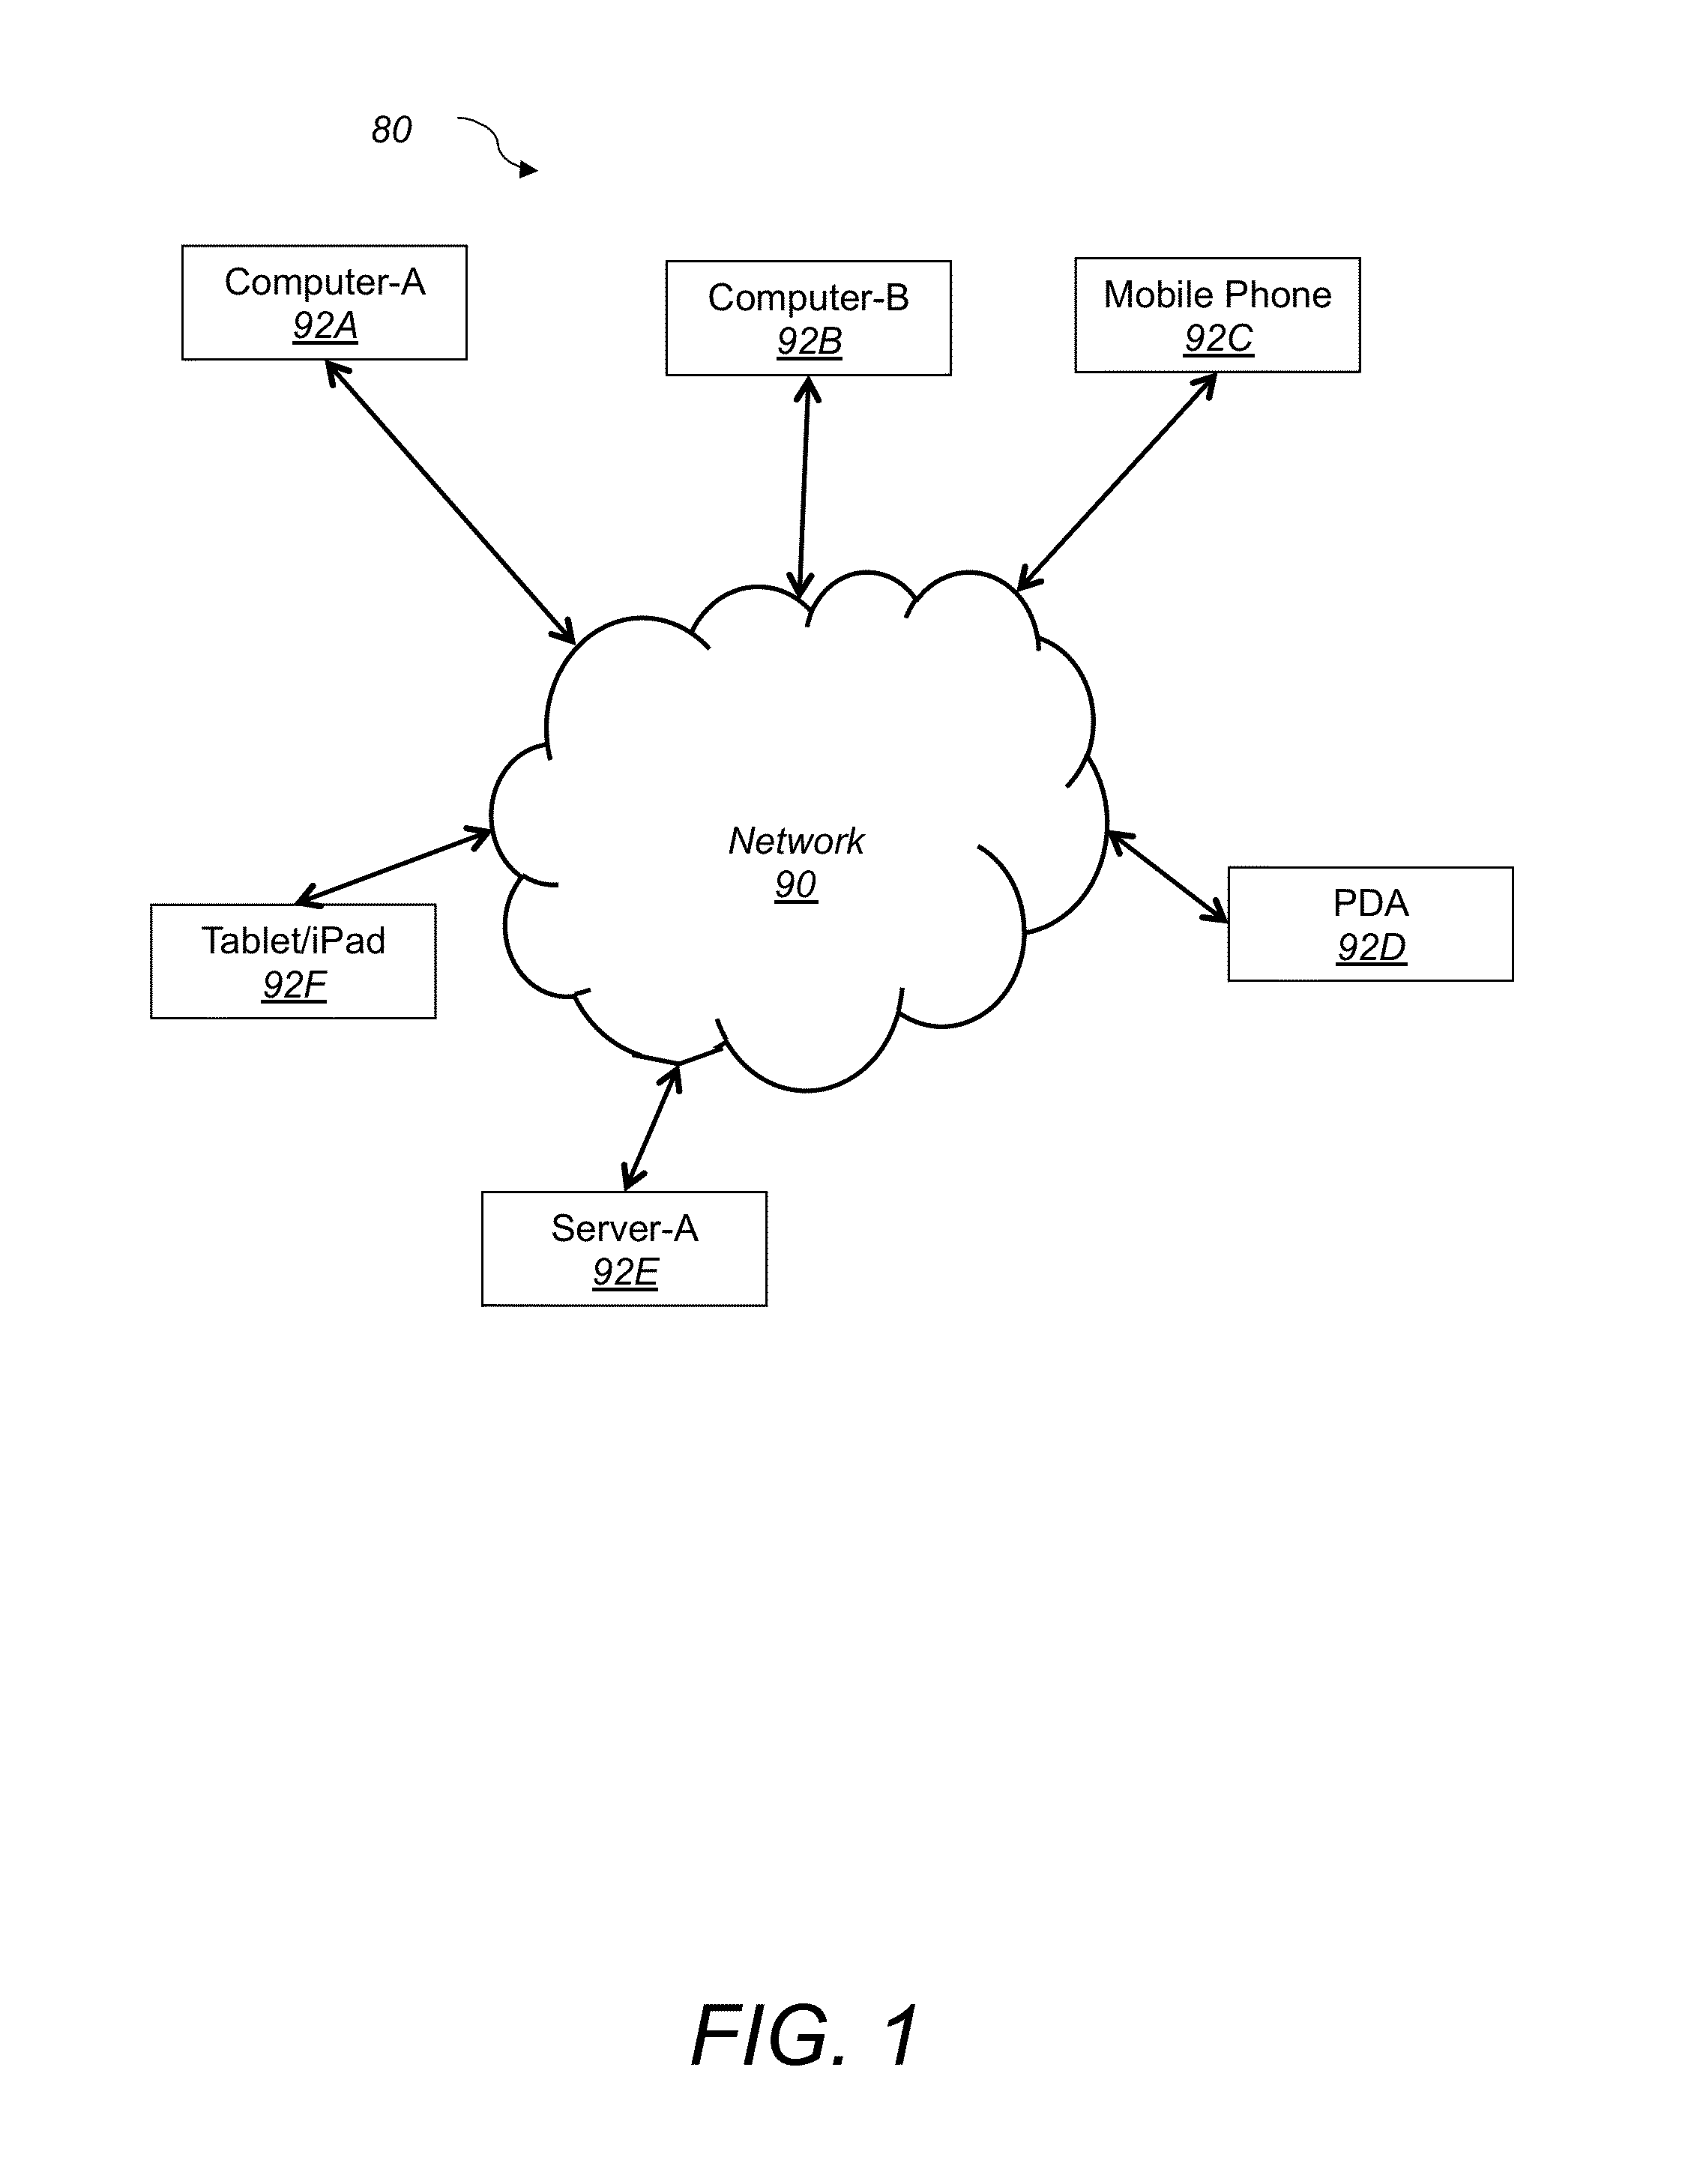 System and method for detecting, alerting and blocking data leakage, eavesdropping and spyware